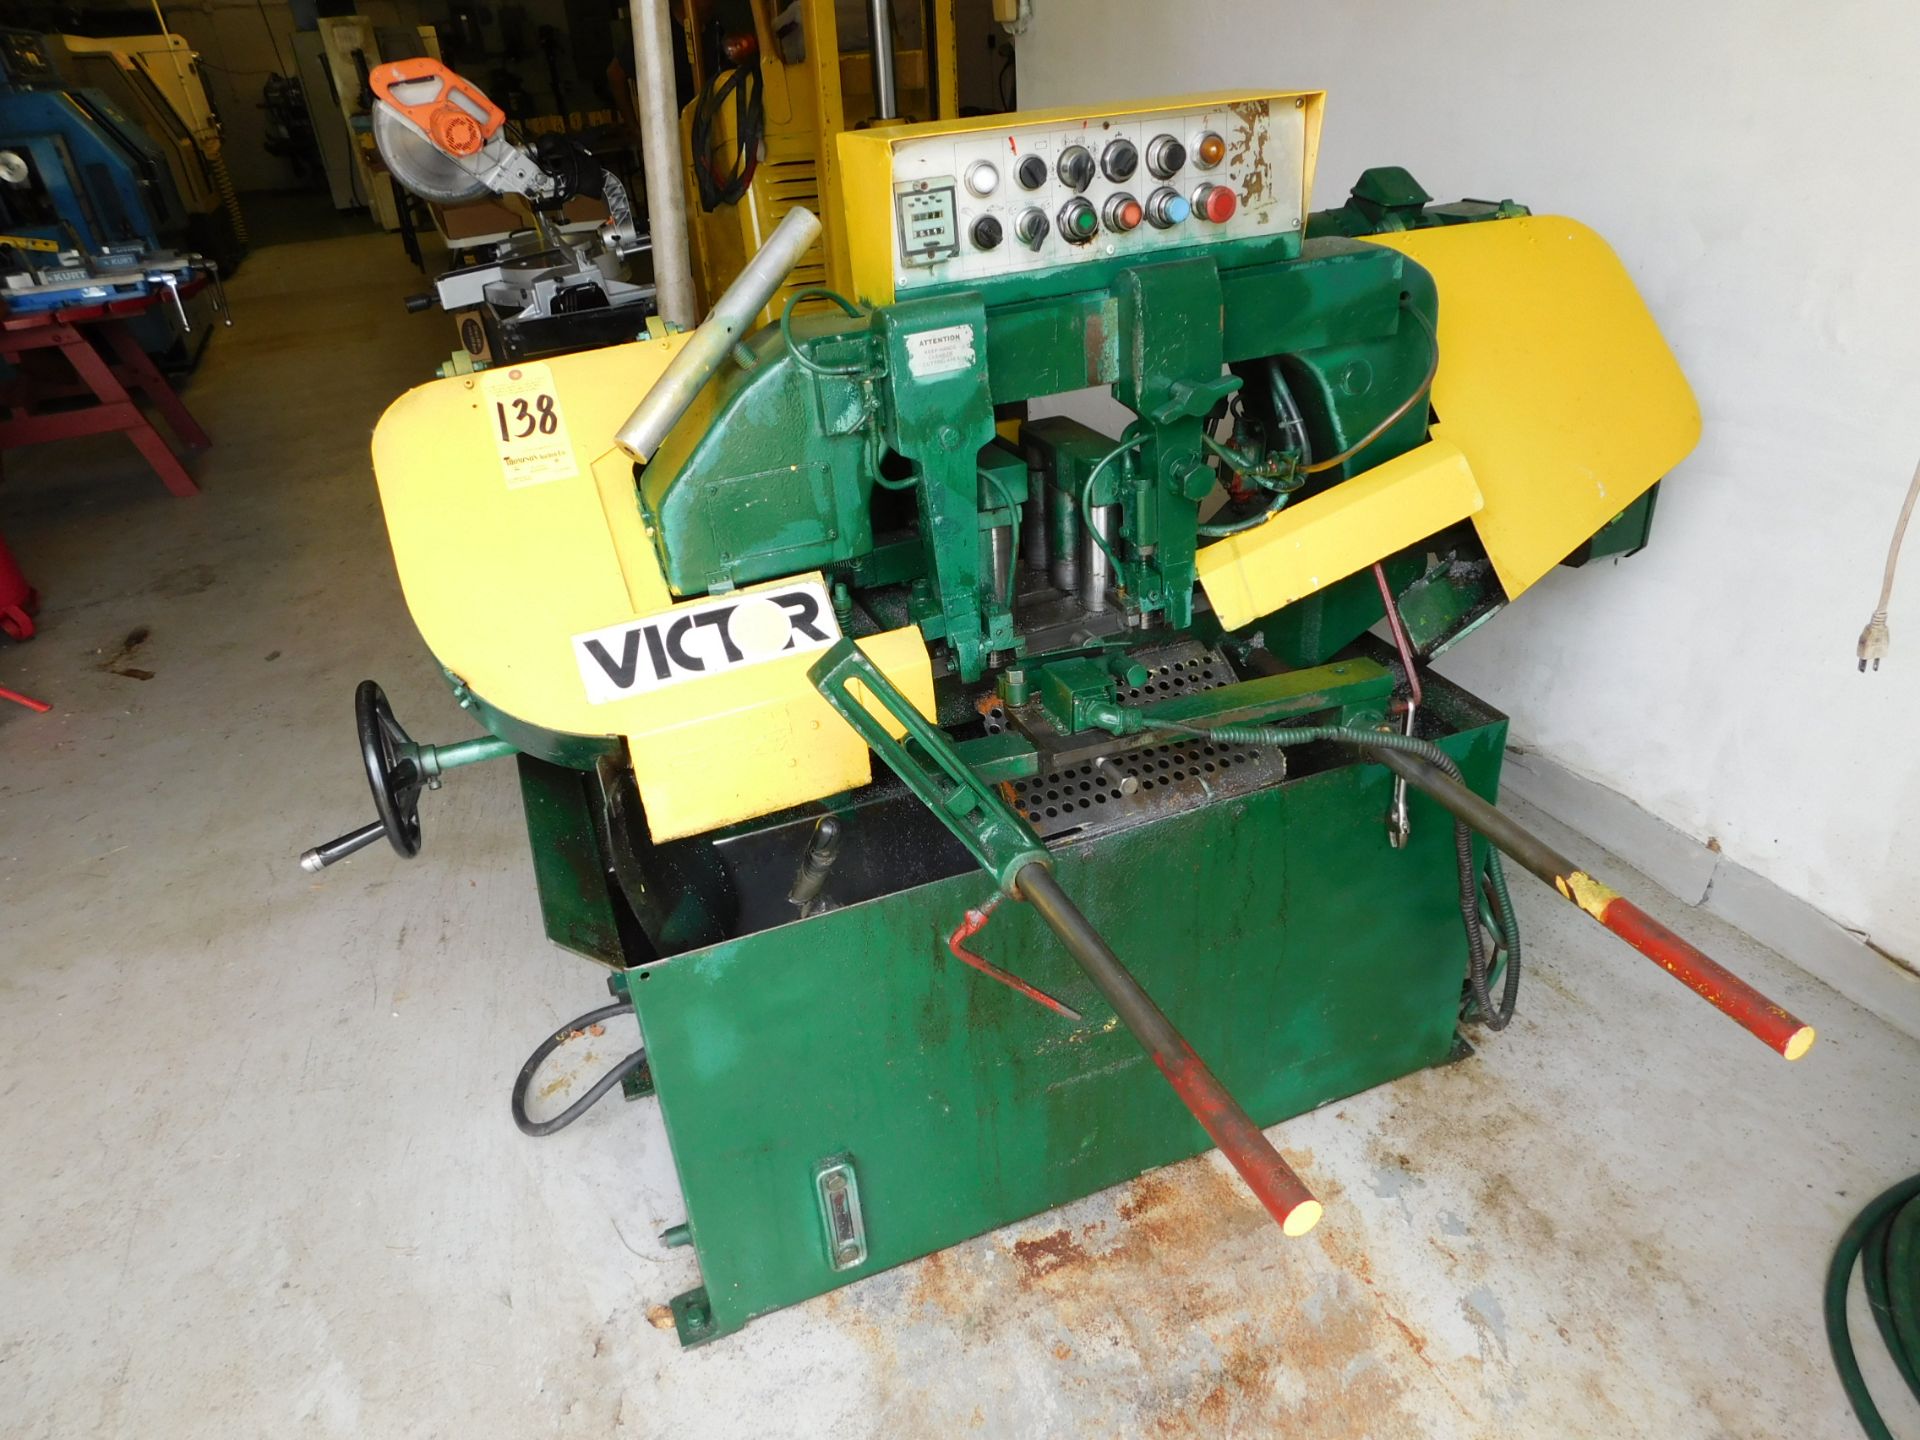 Victor Model Auto - 10H Automatic Horizontal Band Saw, s/n C848118, 10" Round Capacity, Infeed - Image 9 of 9